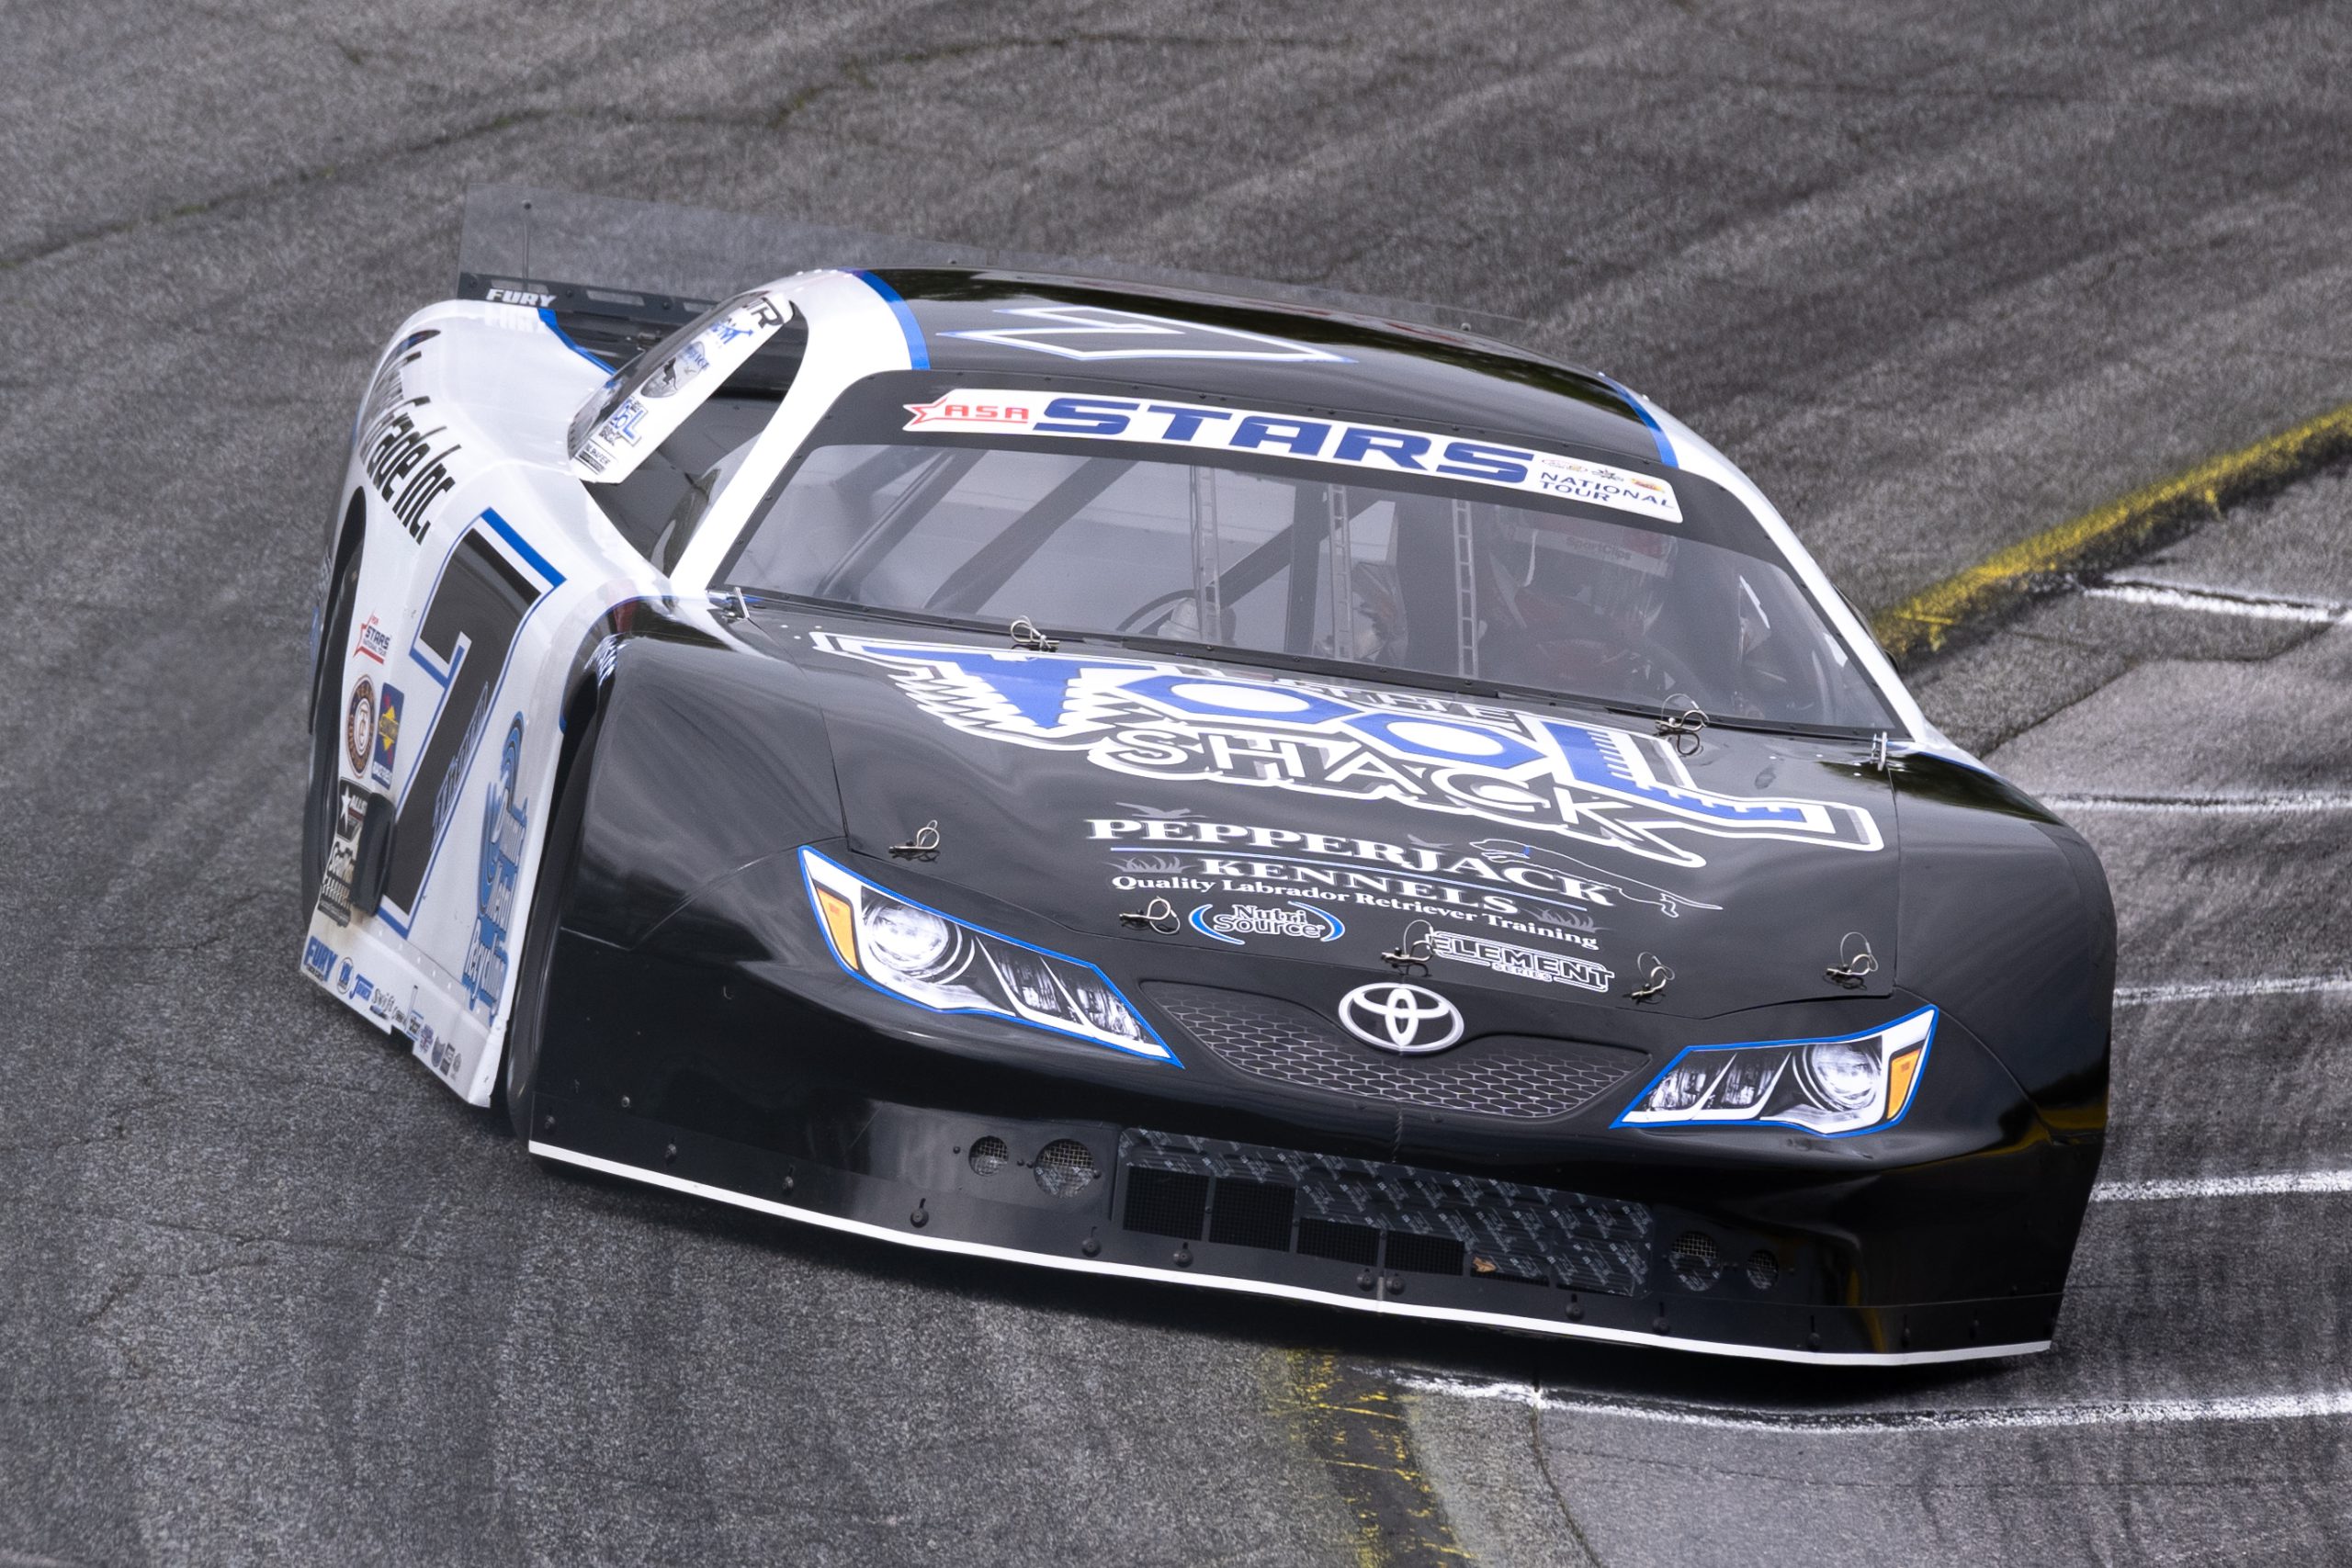 Snowball Derby Champion Returns to ASA STARS National Tour Competition